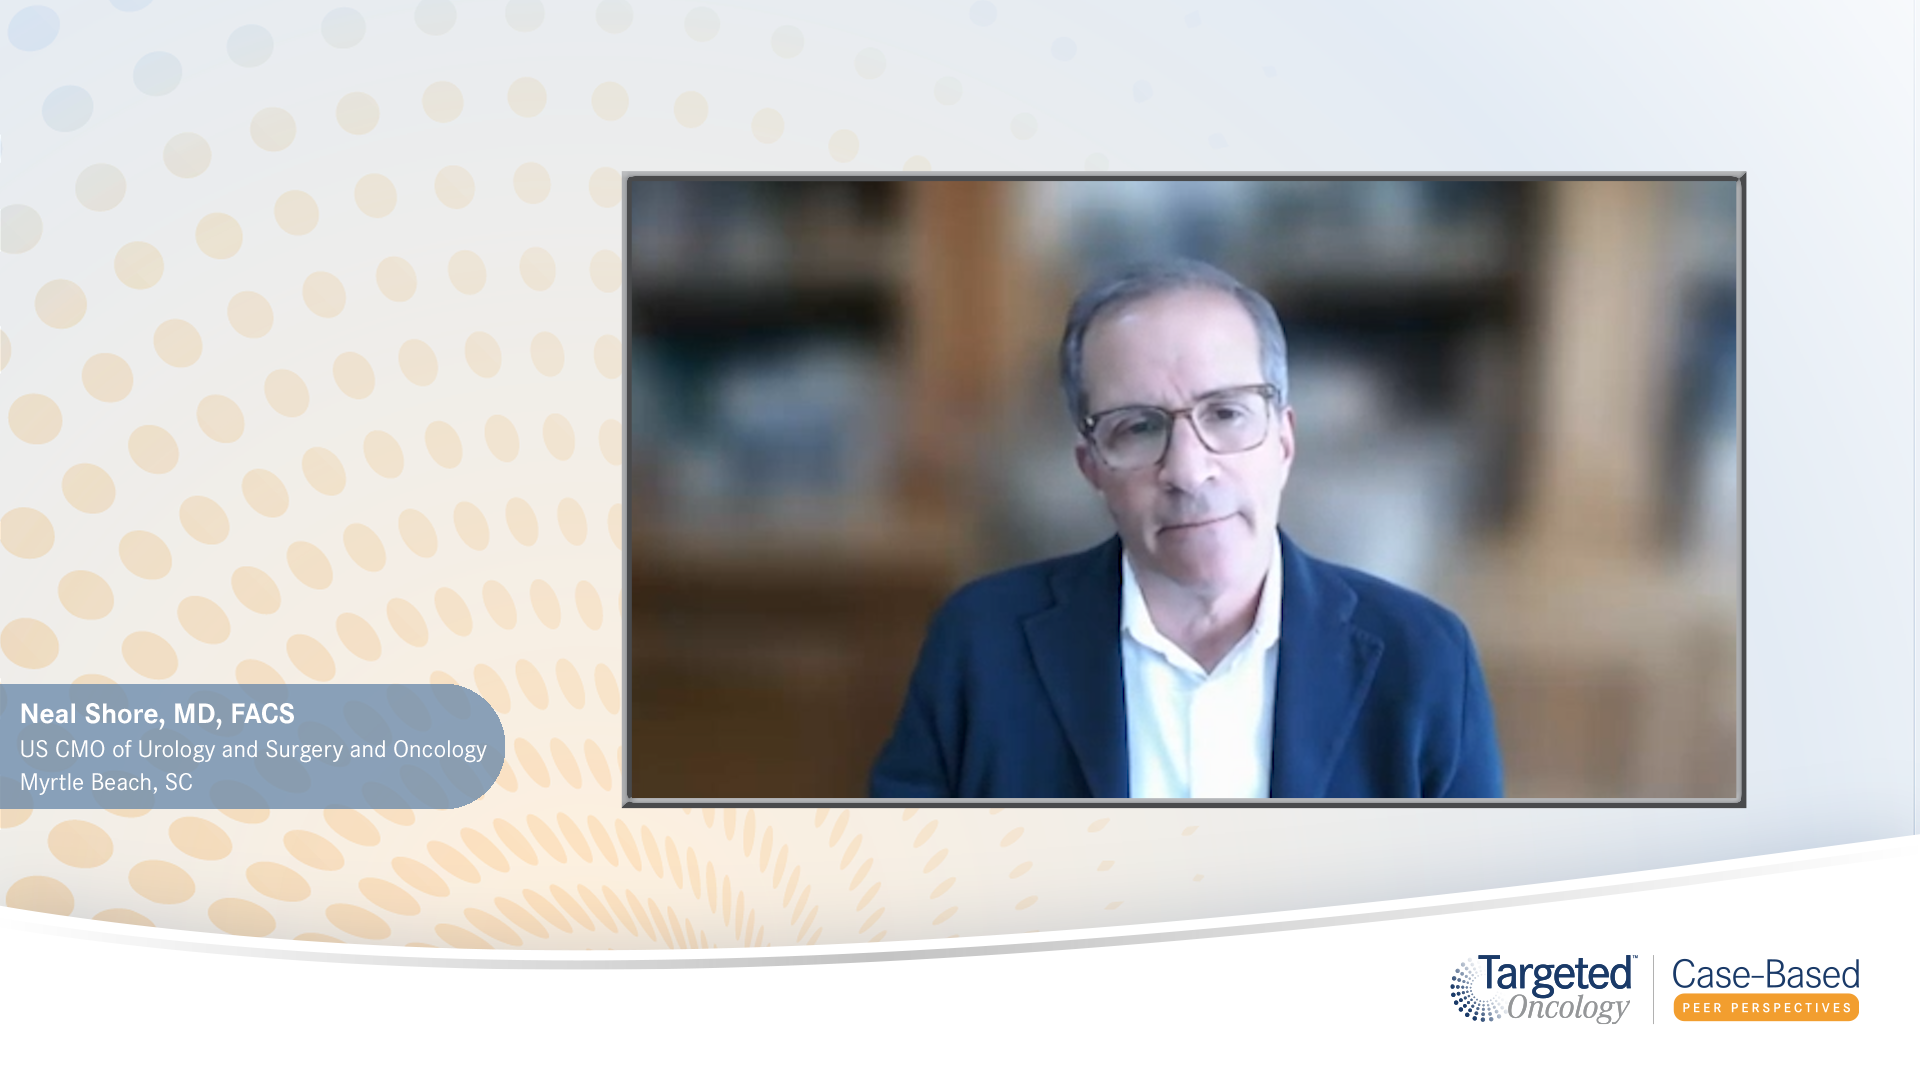 Video 2 - "Addressing Risks and Challenges in the Standard of Care for Patients with nmCRPC"